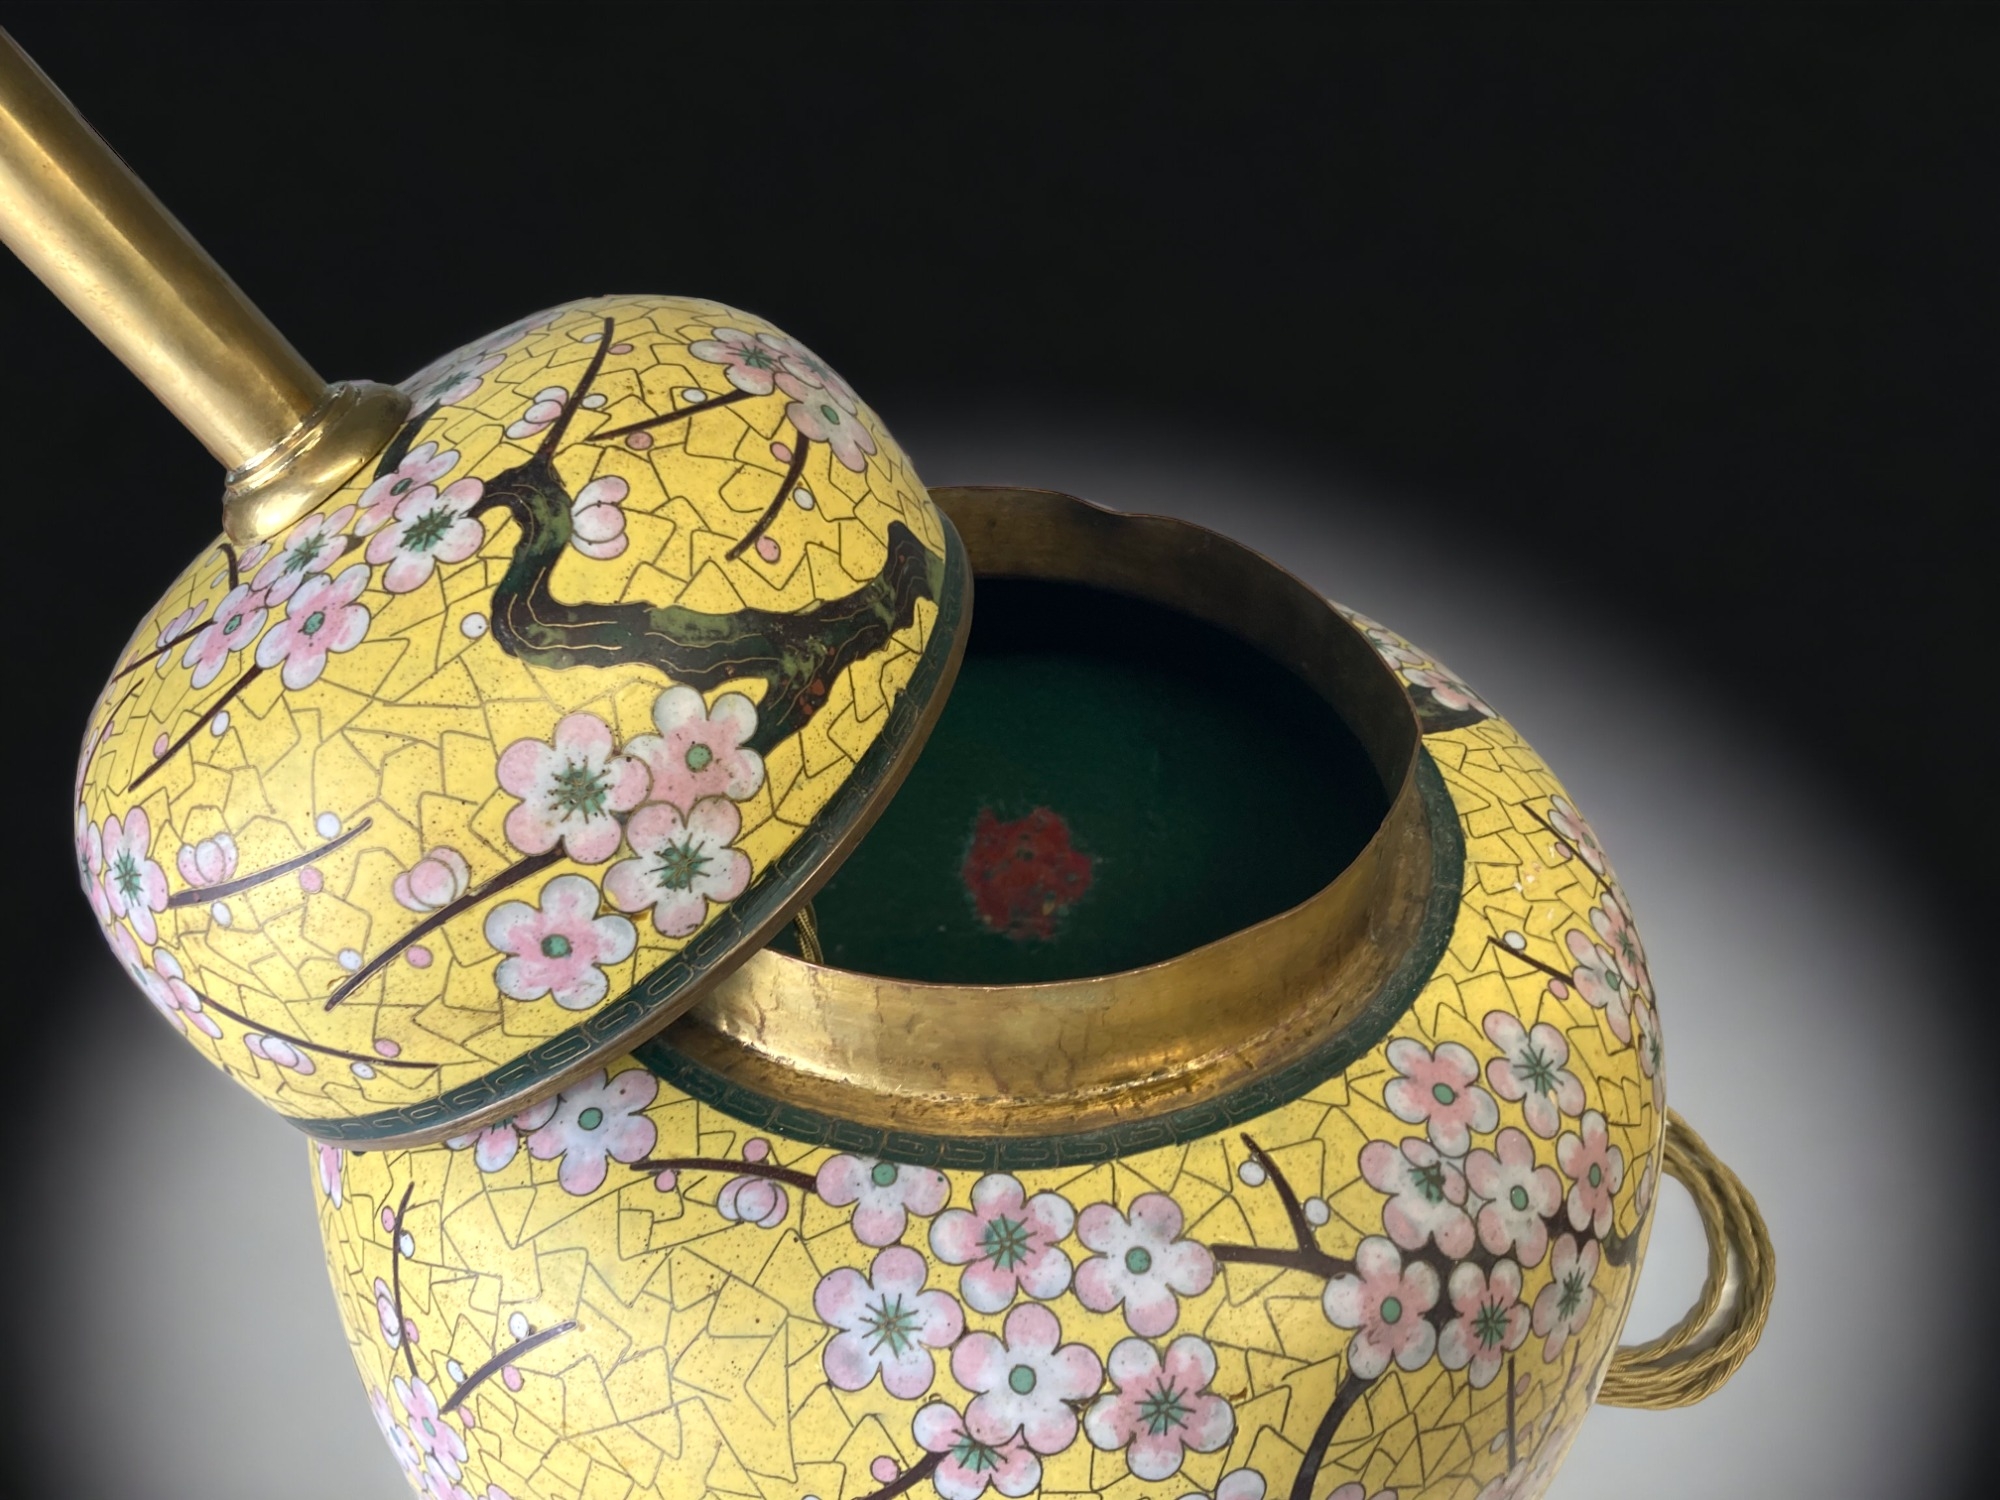 A LARGE CHINESE CLOISONNE JAR & COVER, CONVERTED TO TABLE LAMP. LATE QING DYNASTY. IMPERIAL YELLOW - Image 6 of 7